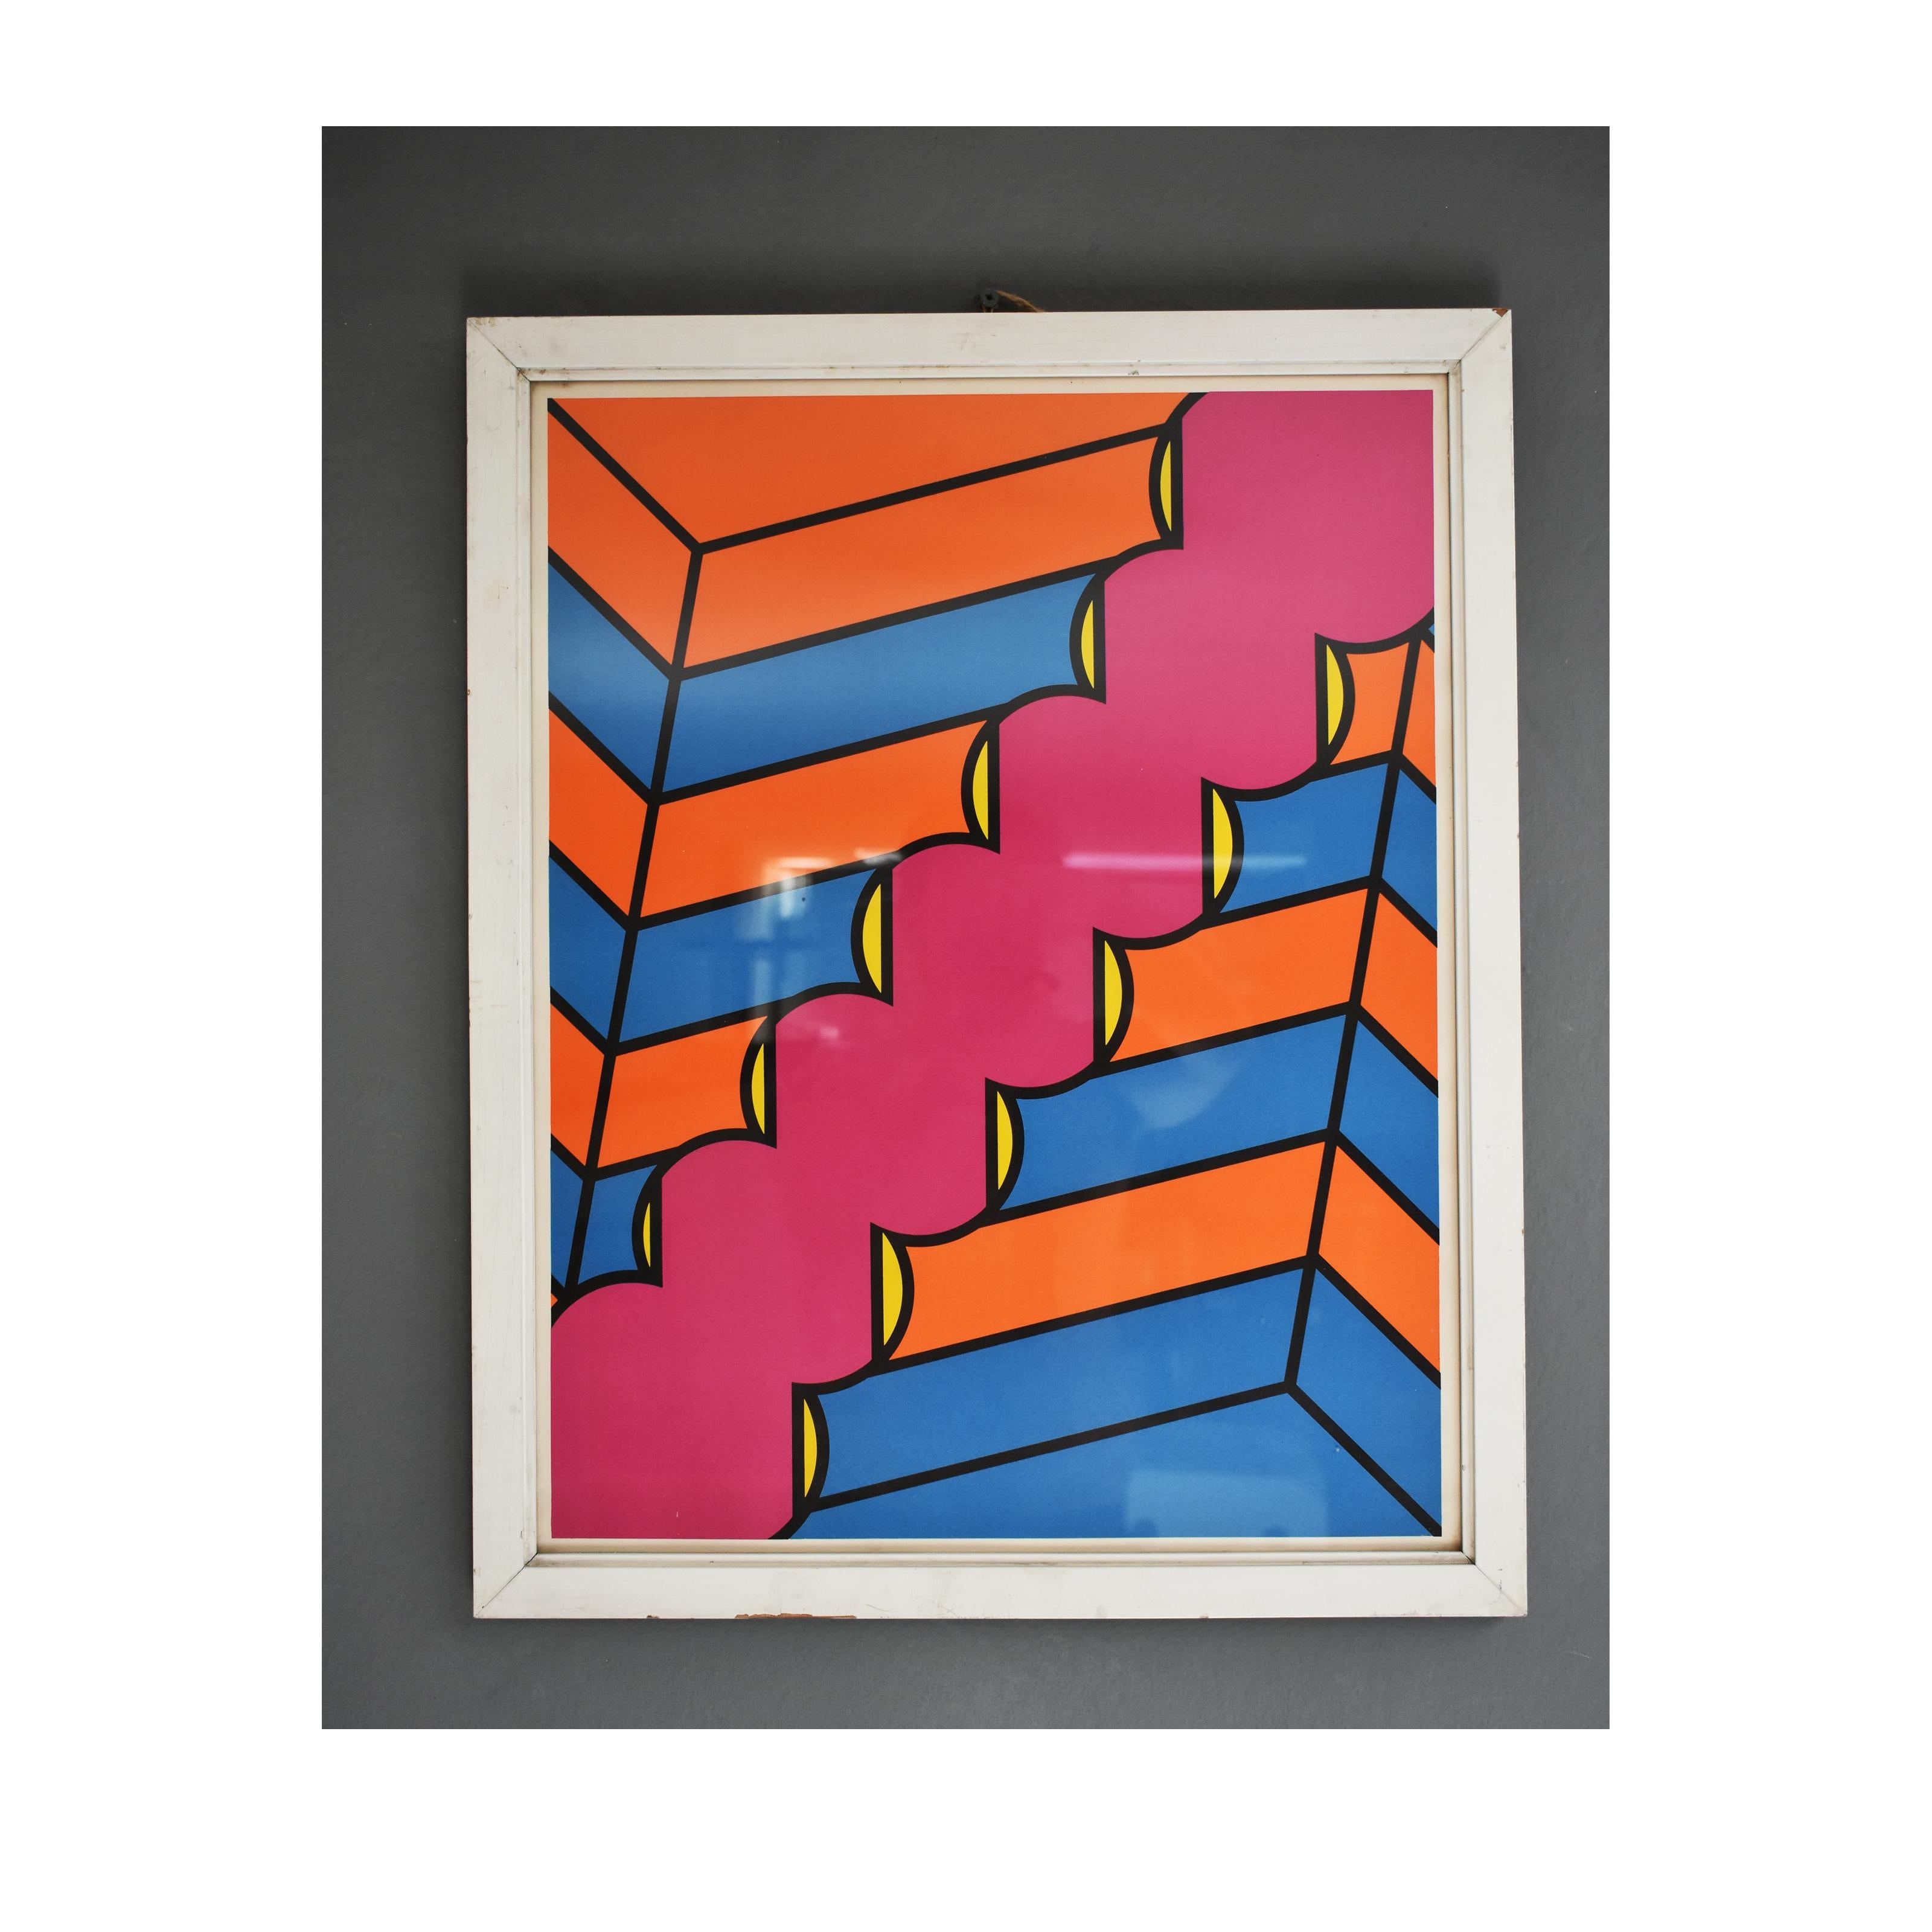 Vintage print dating back to the seventies, Italian production.
The print has a geometric design made with bright colors.
The frame is in white wood, the print is protected by a transparent glass.
Good conditions
Measures
H60cm x 48cm
Mixed